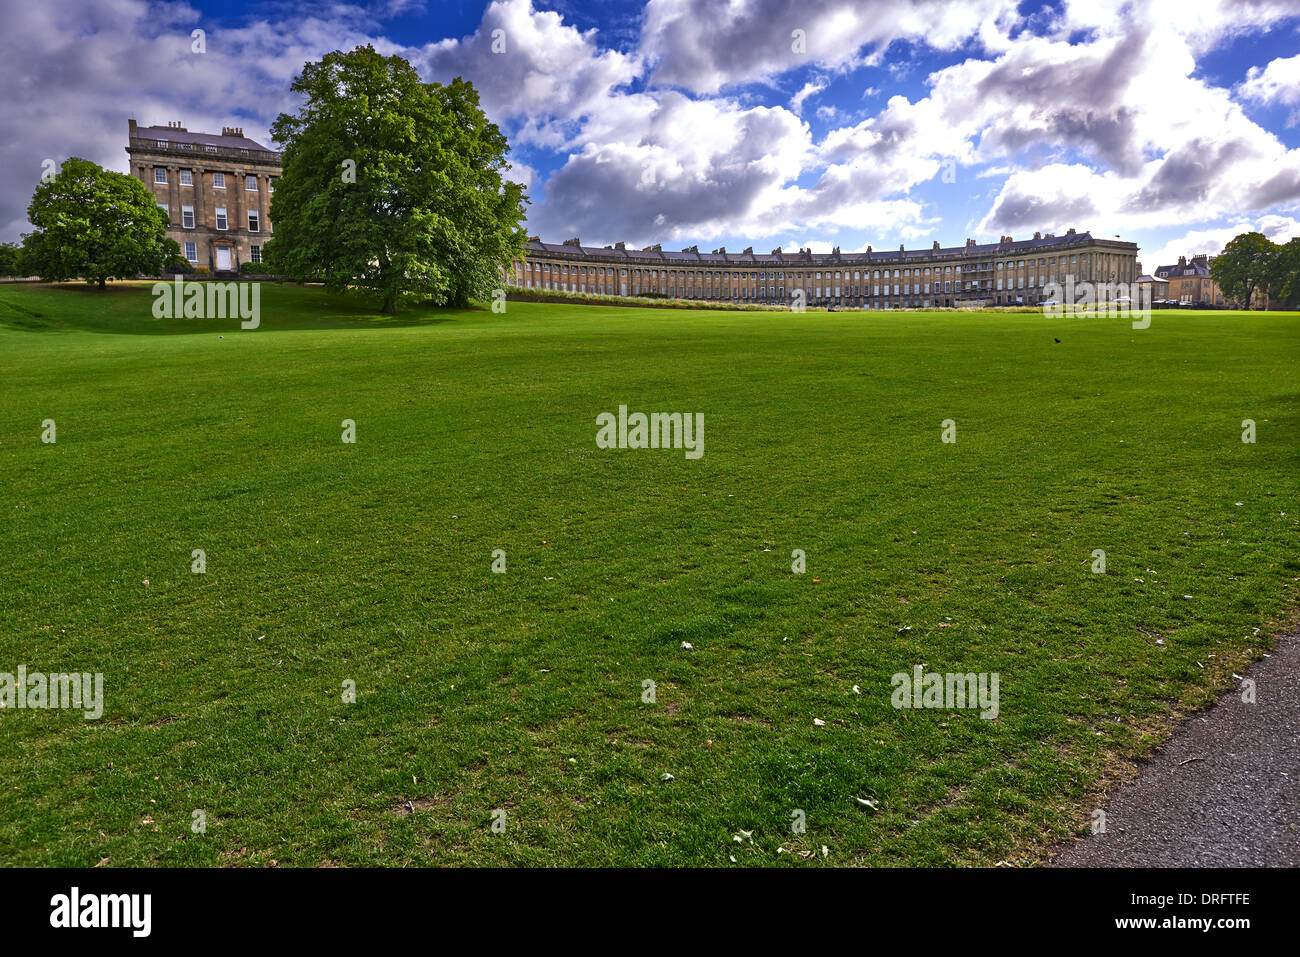 The Royal Crescent is a street of 30 terraced houses laid out in a sweeping crescent in the city of Bath, England Stock Photo